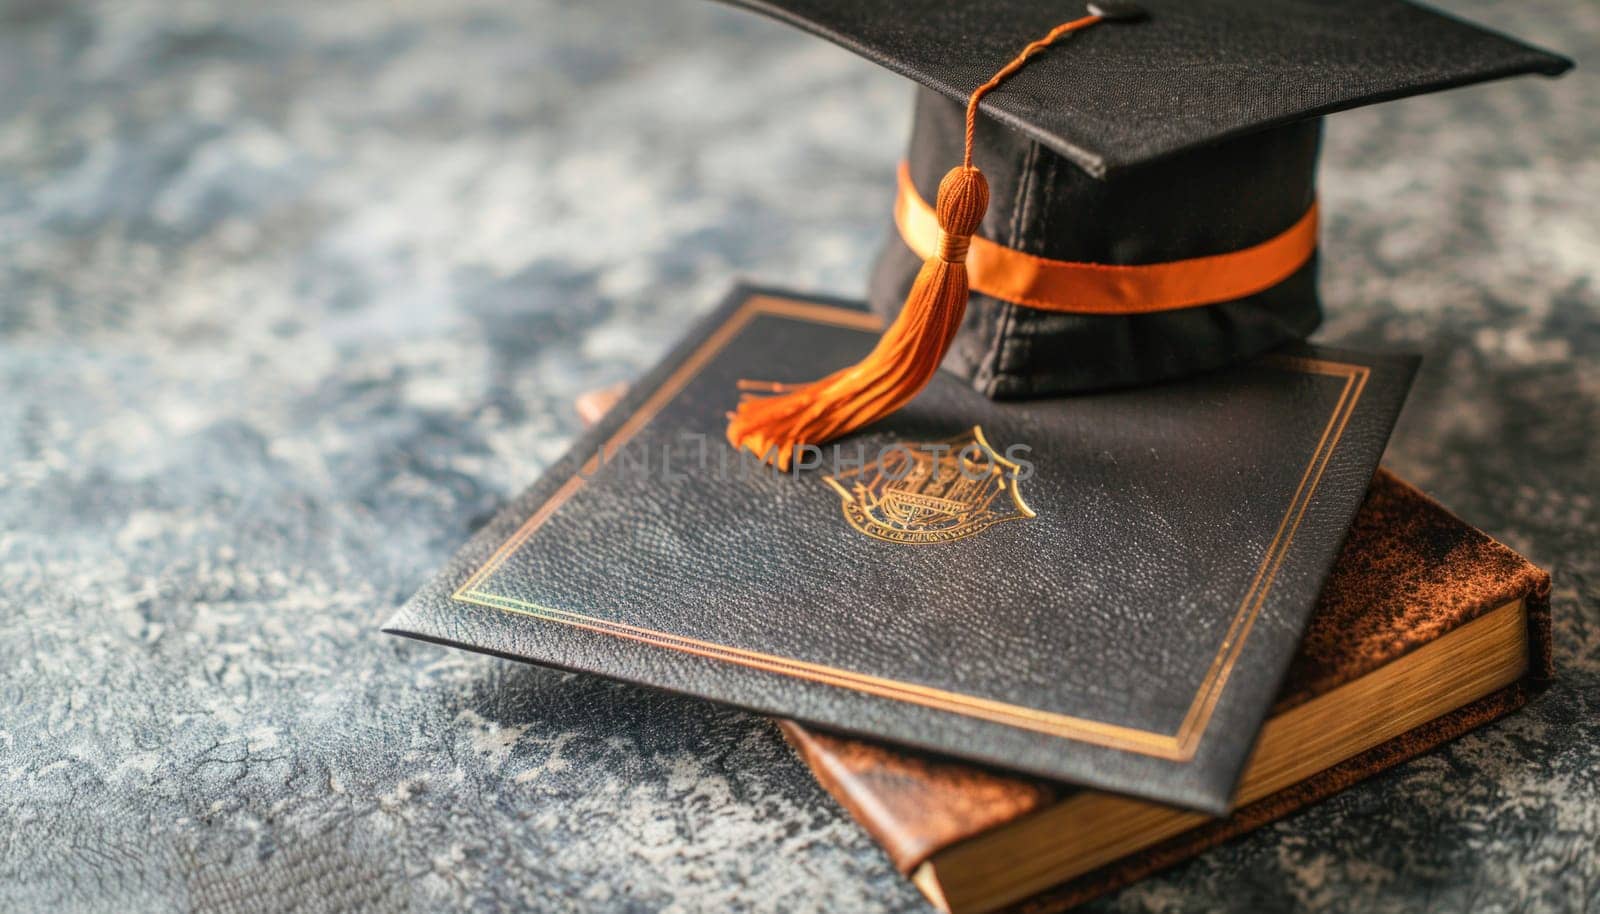 In the image, a beautiful scene is displayed featuring a graduation cap placed gracefully on top of a diploma